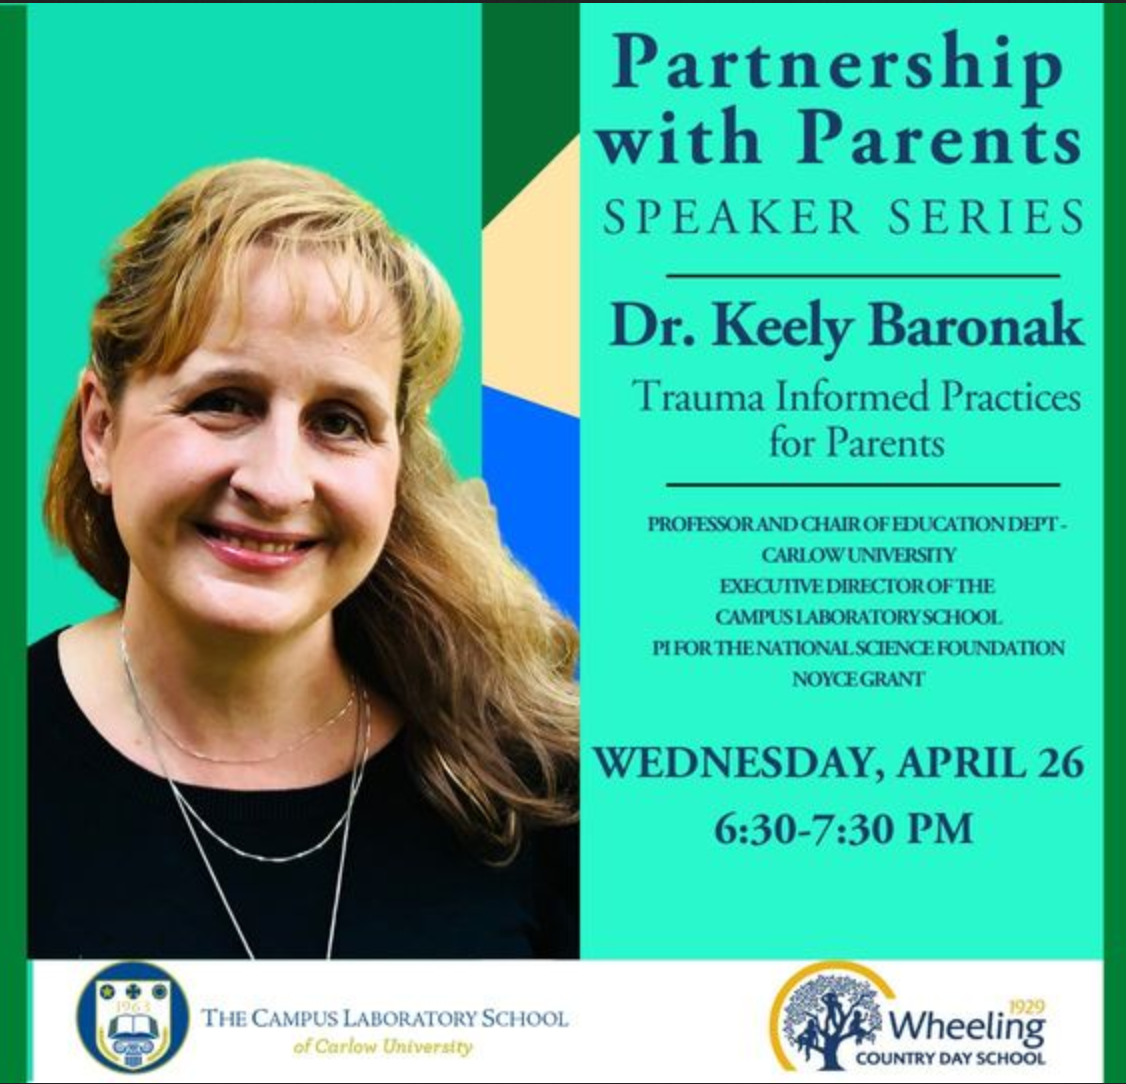 Partnership w/ Parents Speaker Series - Trauma-Informed Practices for Parents w/ Dr. Keely Baronak